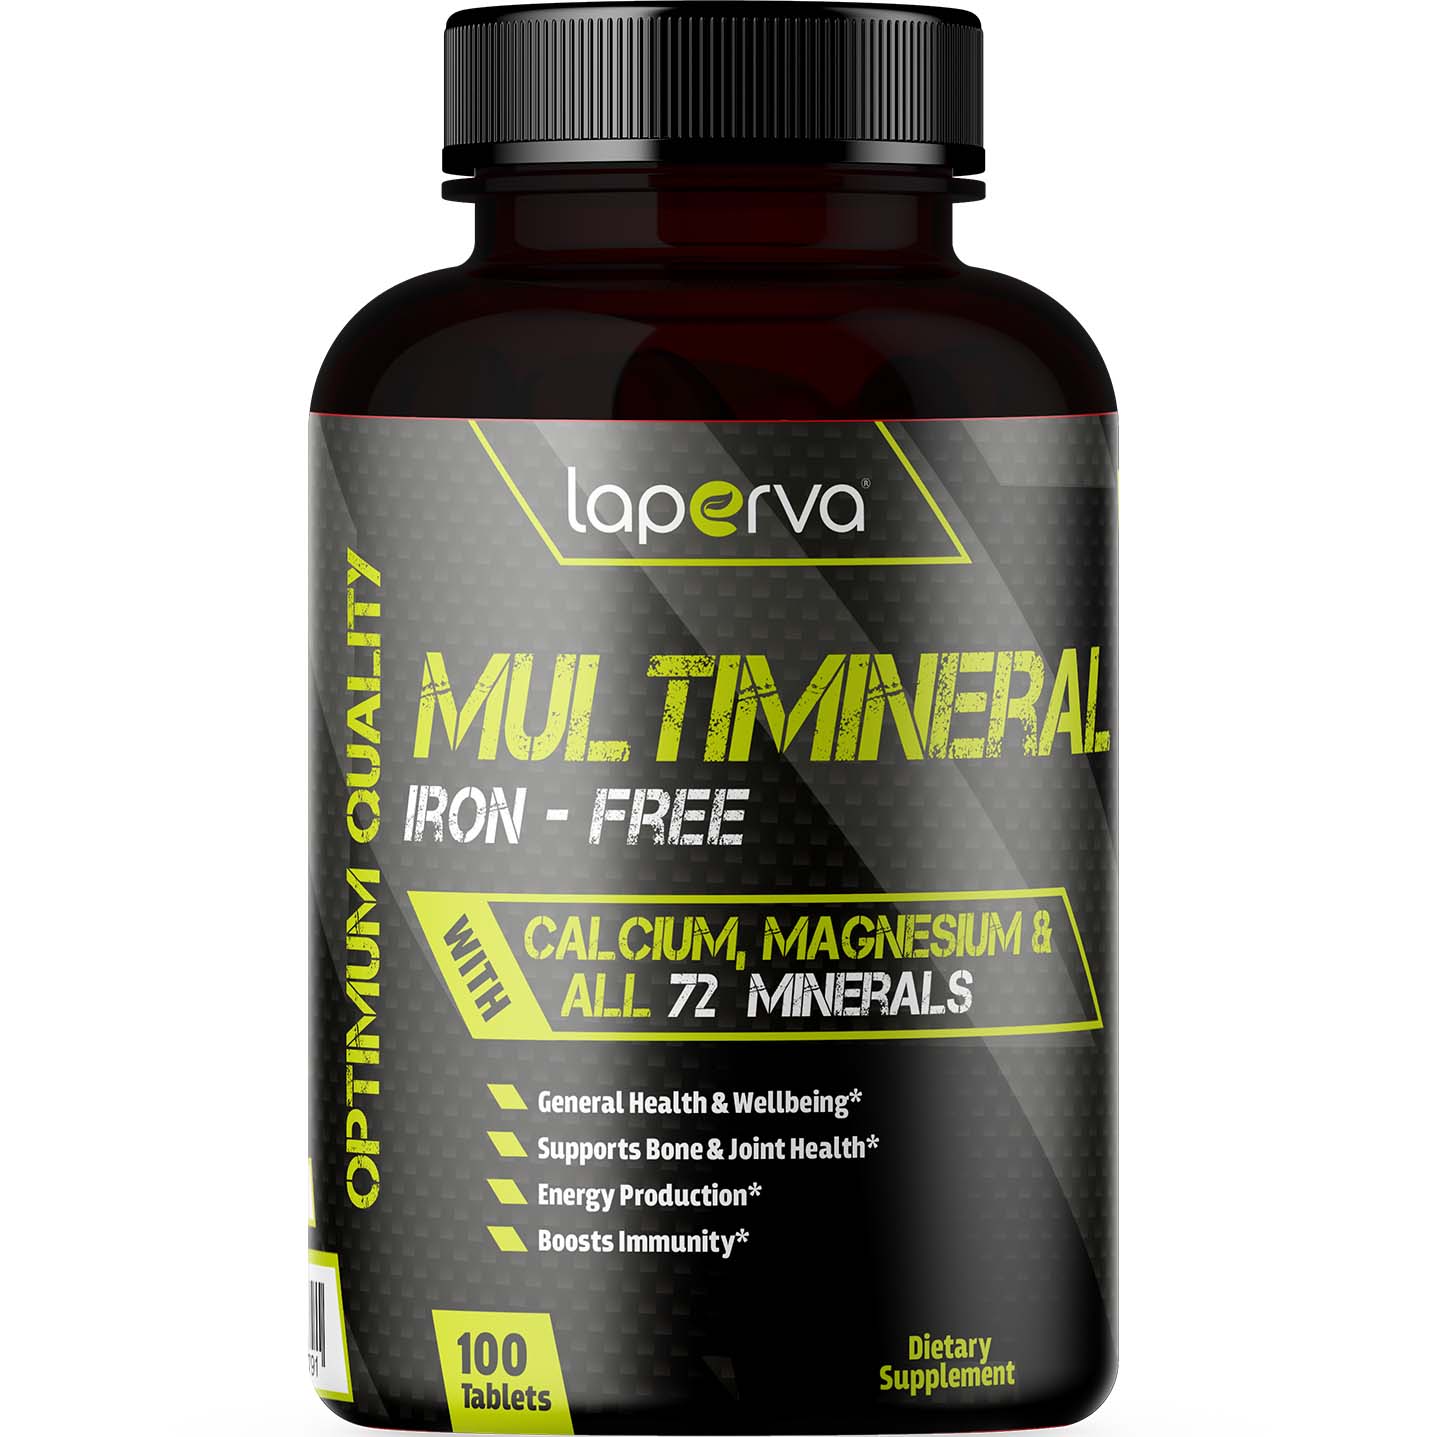 Laperva Multimineral Iron Free, 100 Tablets